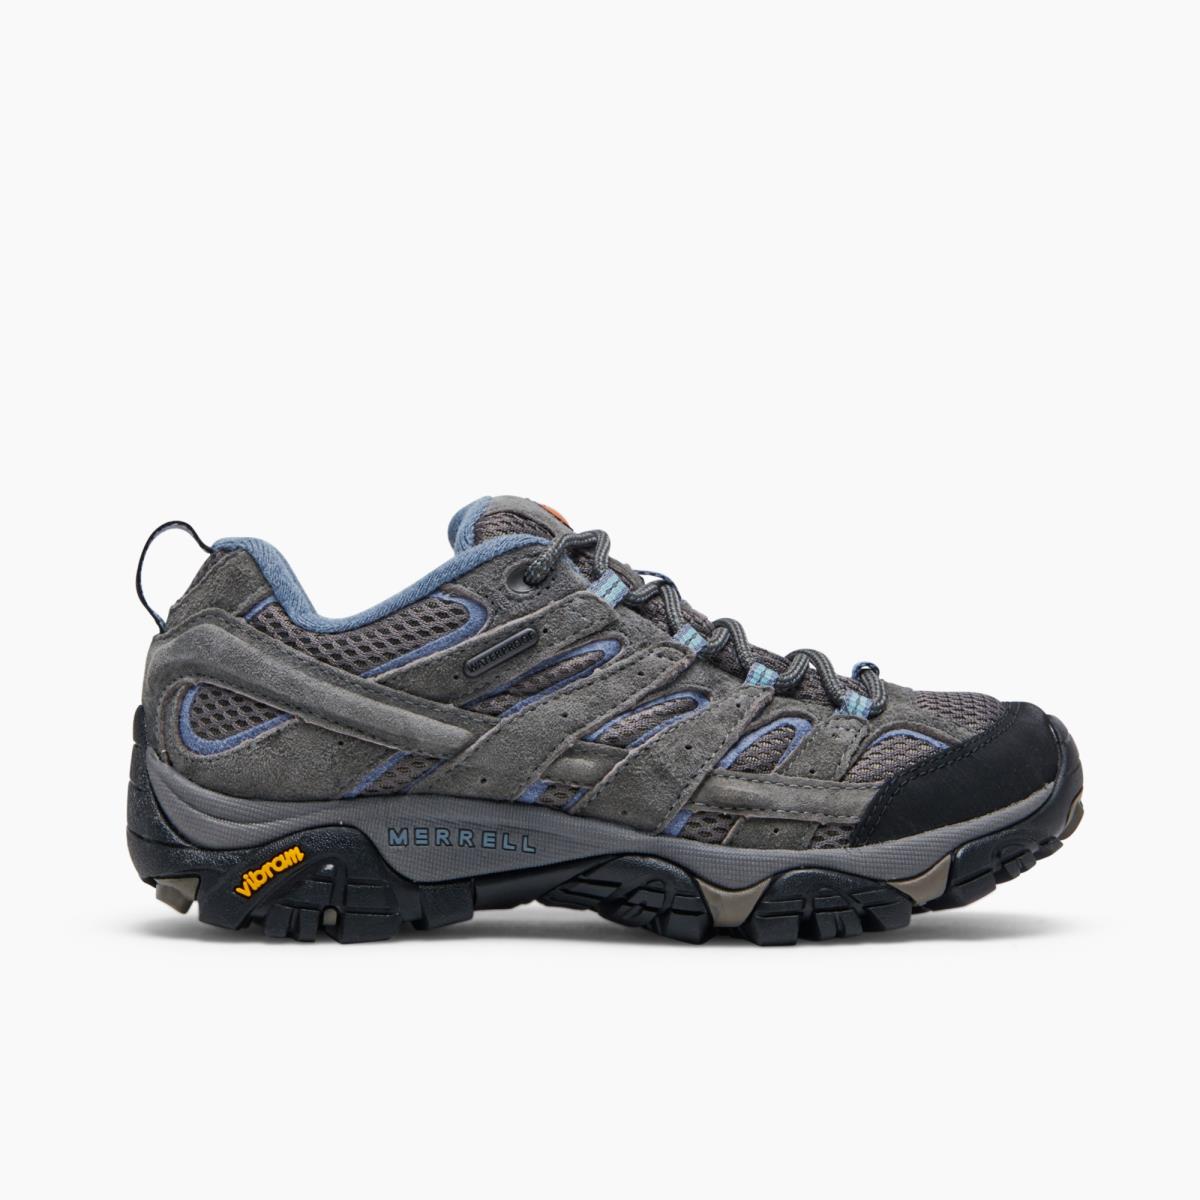 Merrell Women Moab 2 Waterproof Wide Width Hiking Shoes Suede Leather-and-mesh Granite